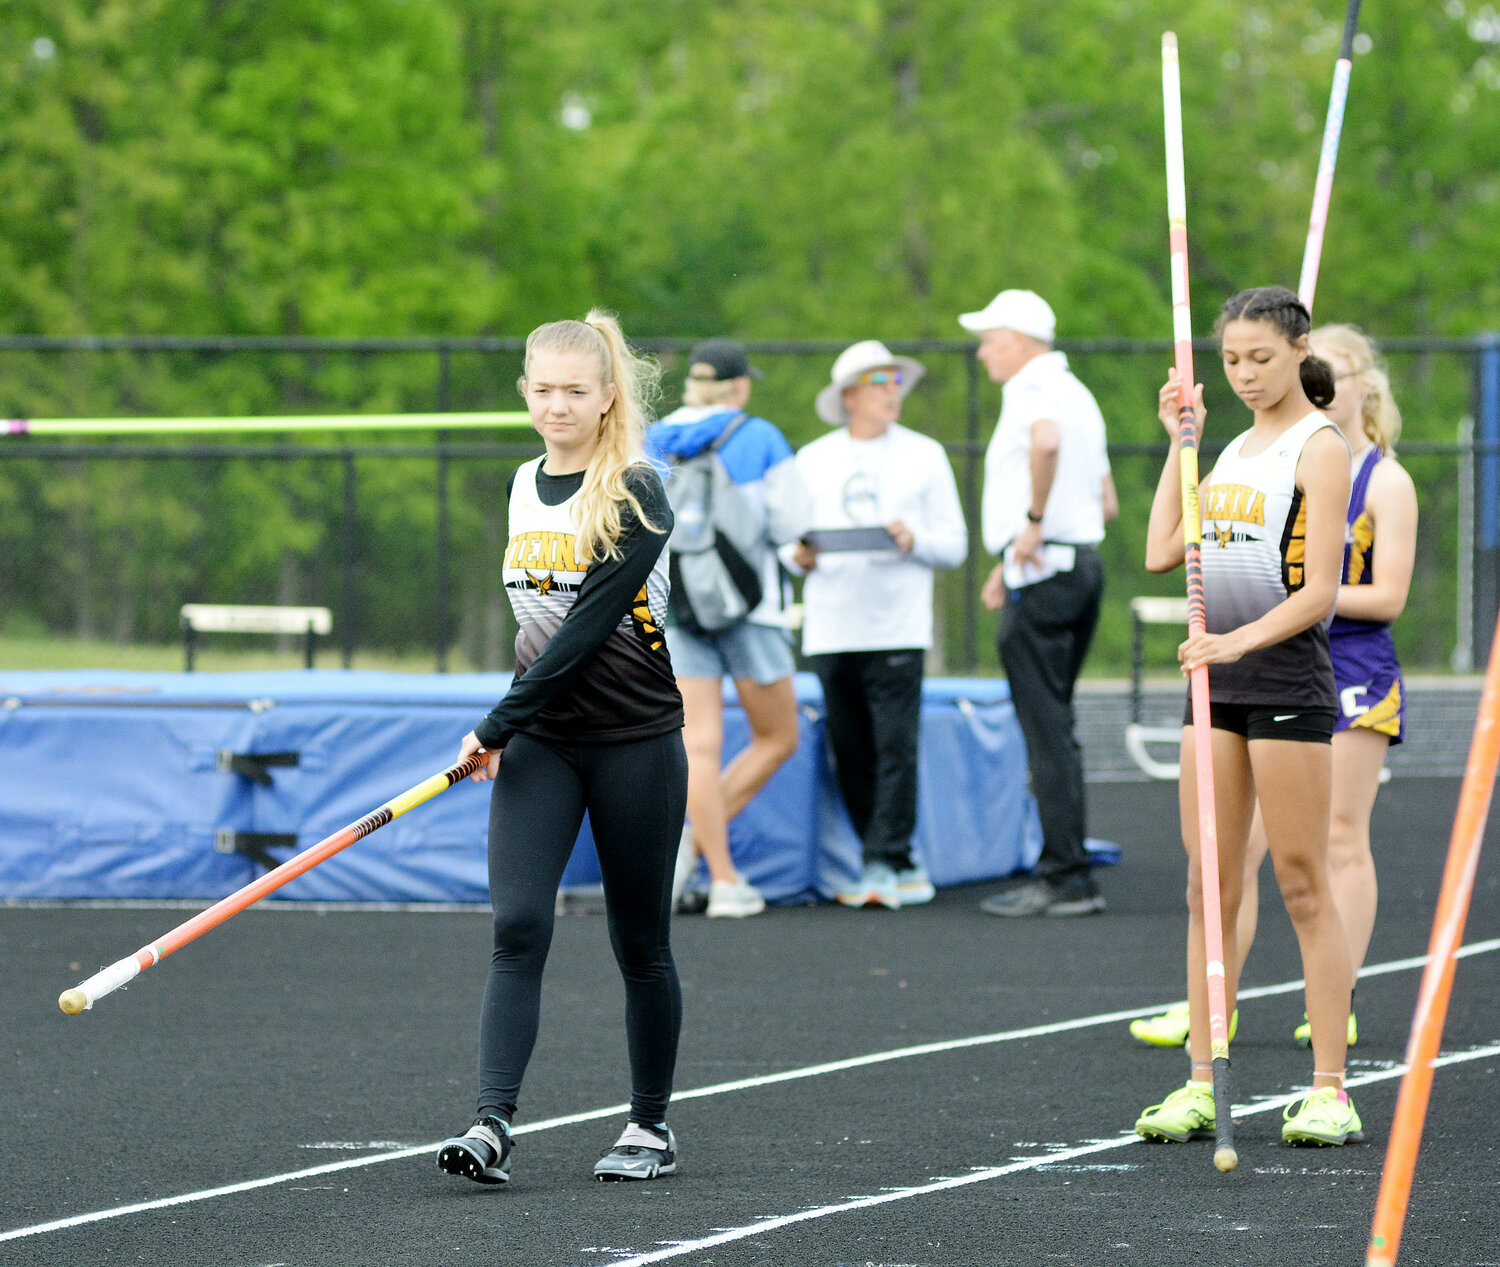 Riley Rosentreter and Julianna Davis (from left) prepare to compete in the girls pole vault during the MSHSAA Class 1, District 2 meet held at South Callaway High School in Mokane.